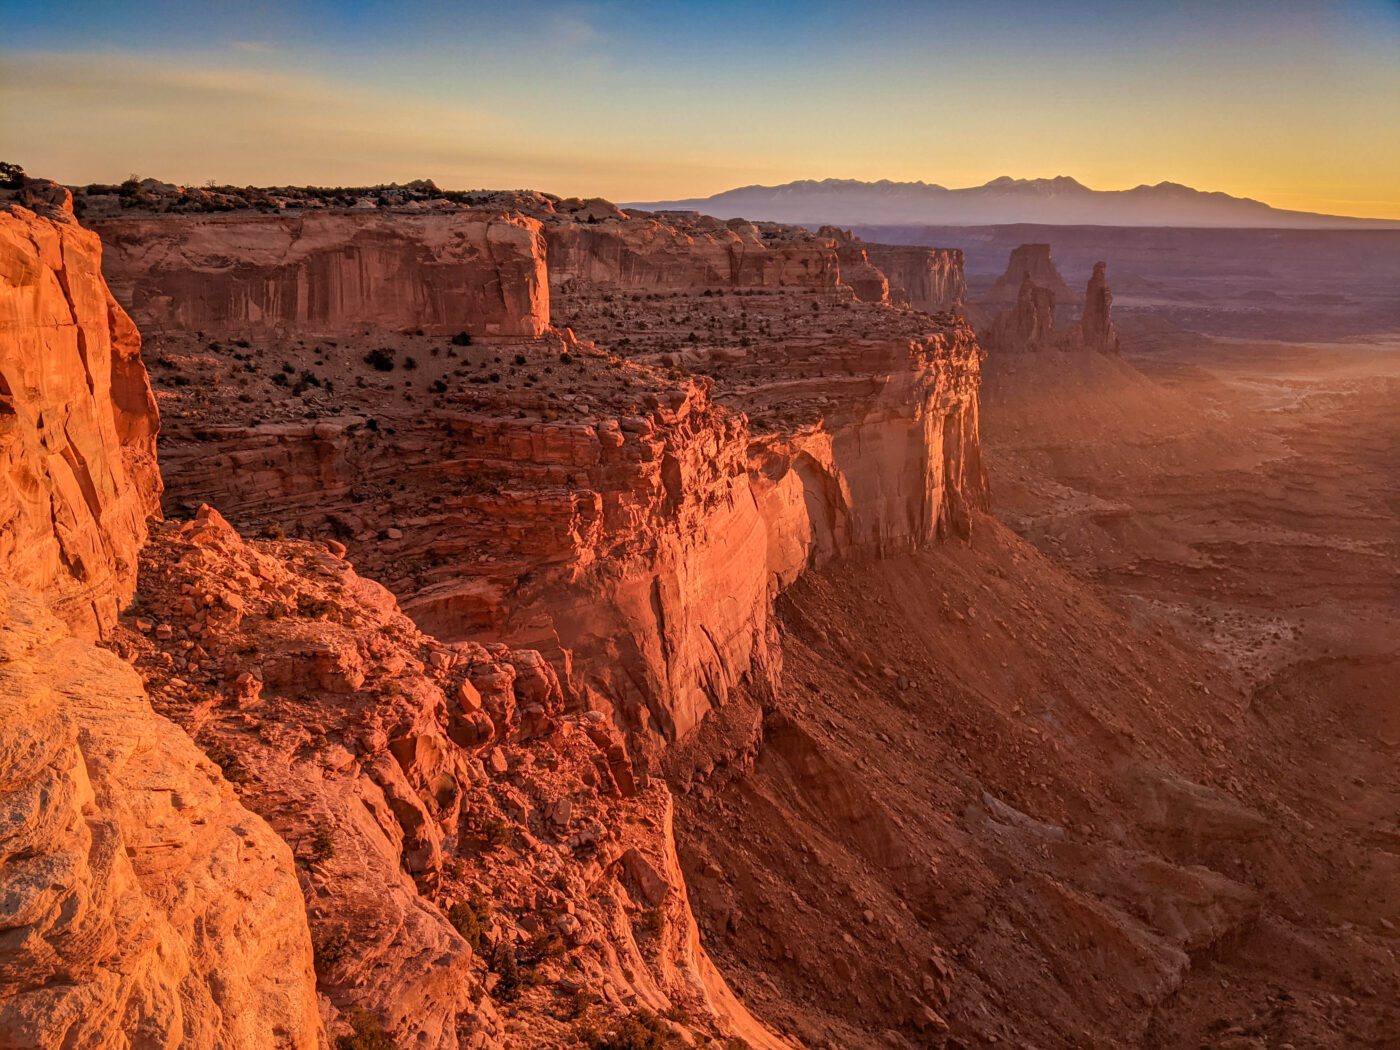 Sunlit red rock cliffs with mountains in the background in Canyonlands National Park near Moab.